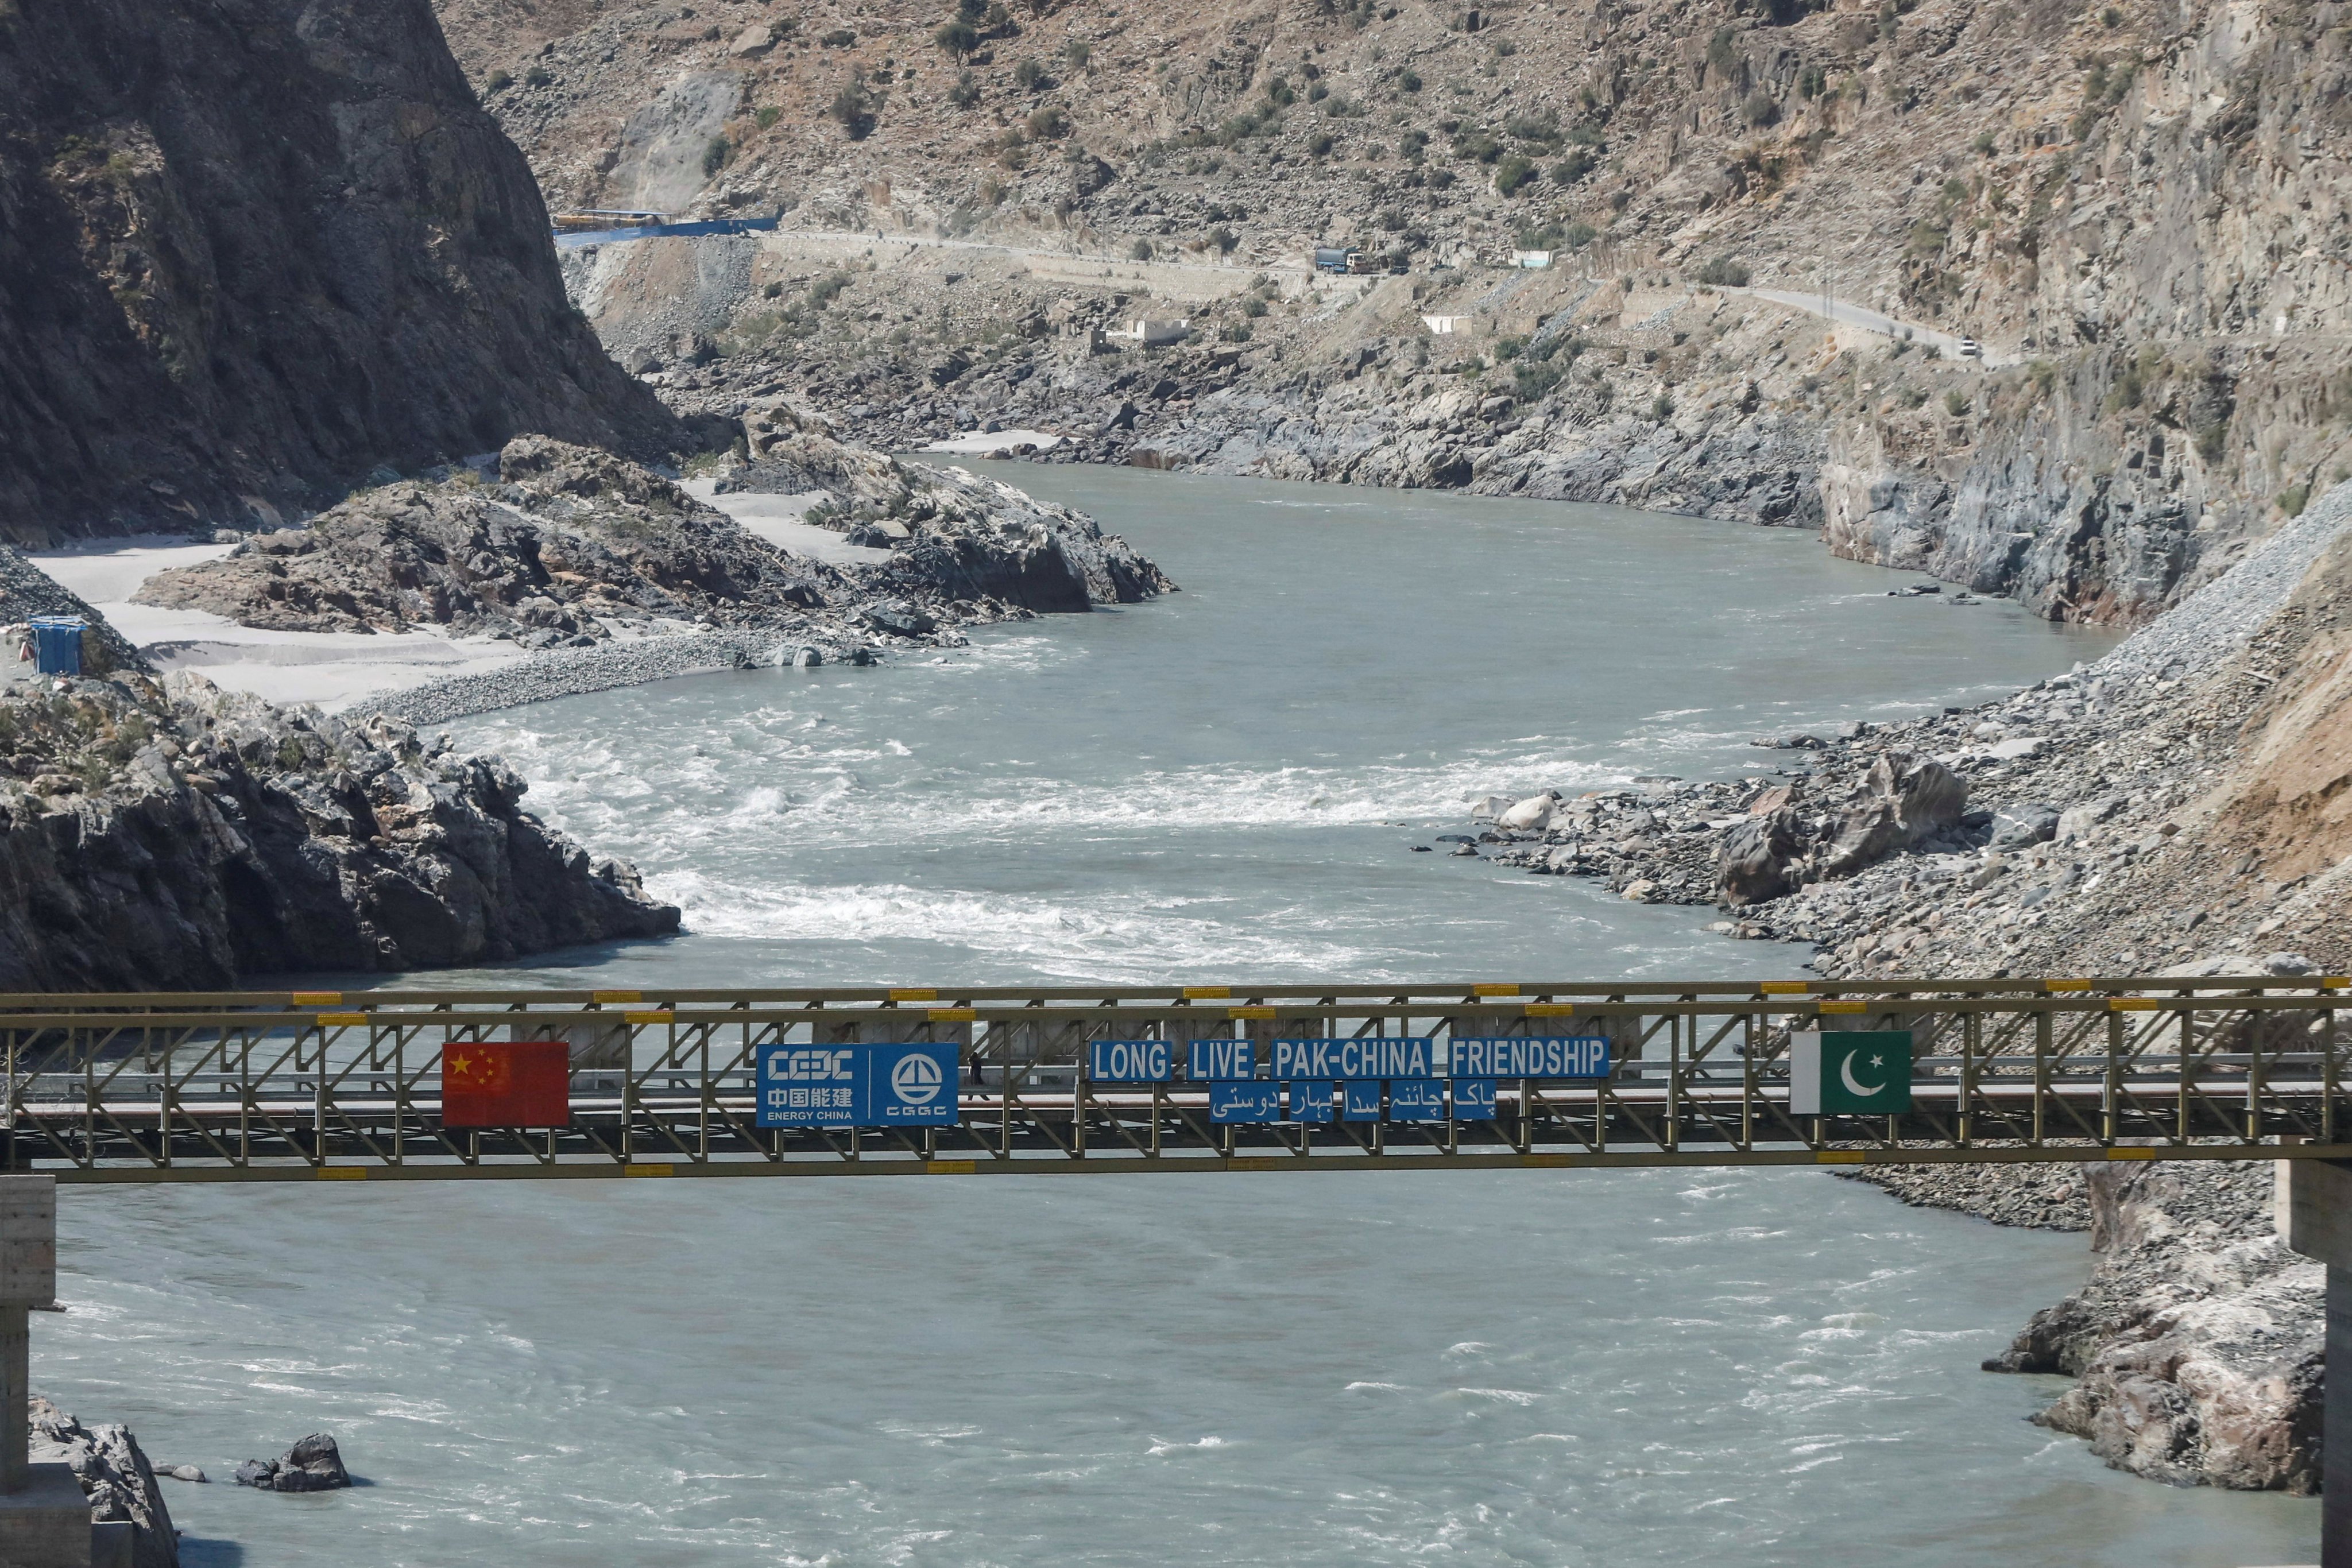 A bridge with the flags of China and Pakistan over the River Indus, at the site of Dasu Dam or Dasu Hydropower Project, in Kohistan district Kyber Pakhtunkhwa province, near Dasu, Pakistan. Photo: Reuters